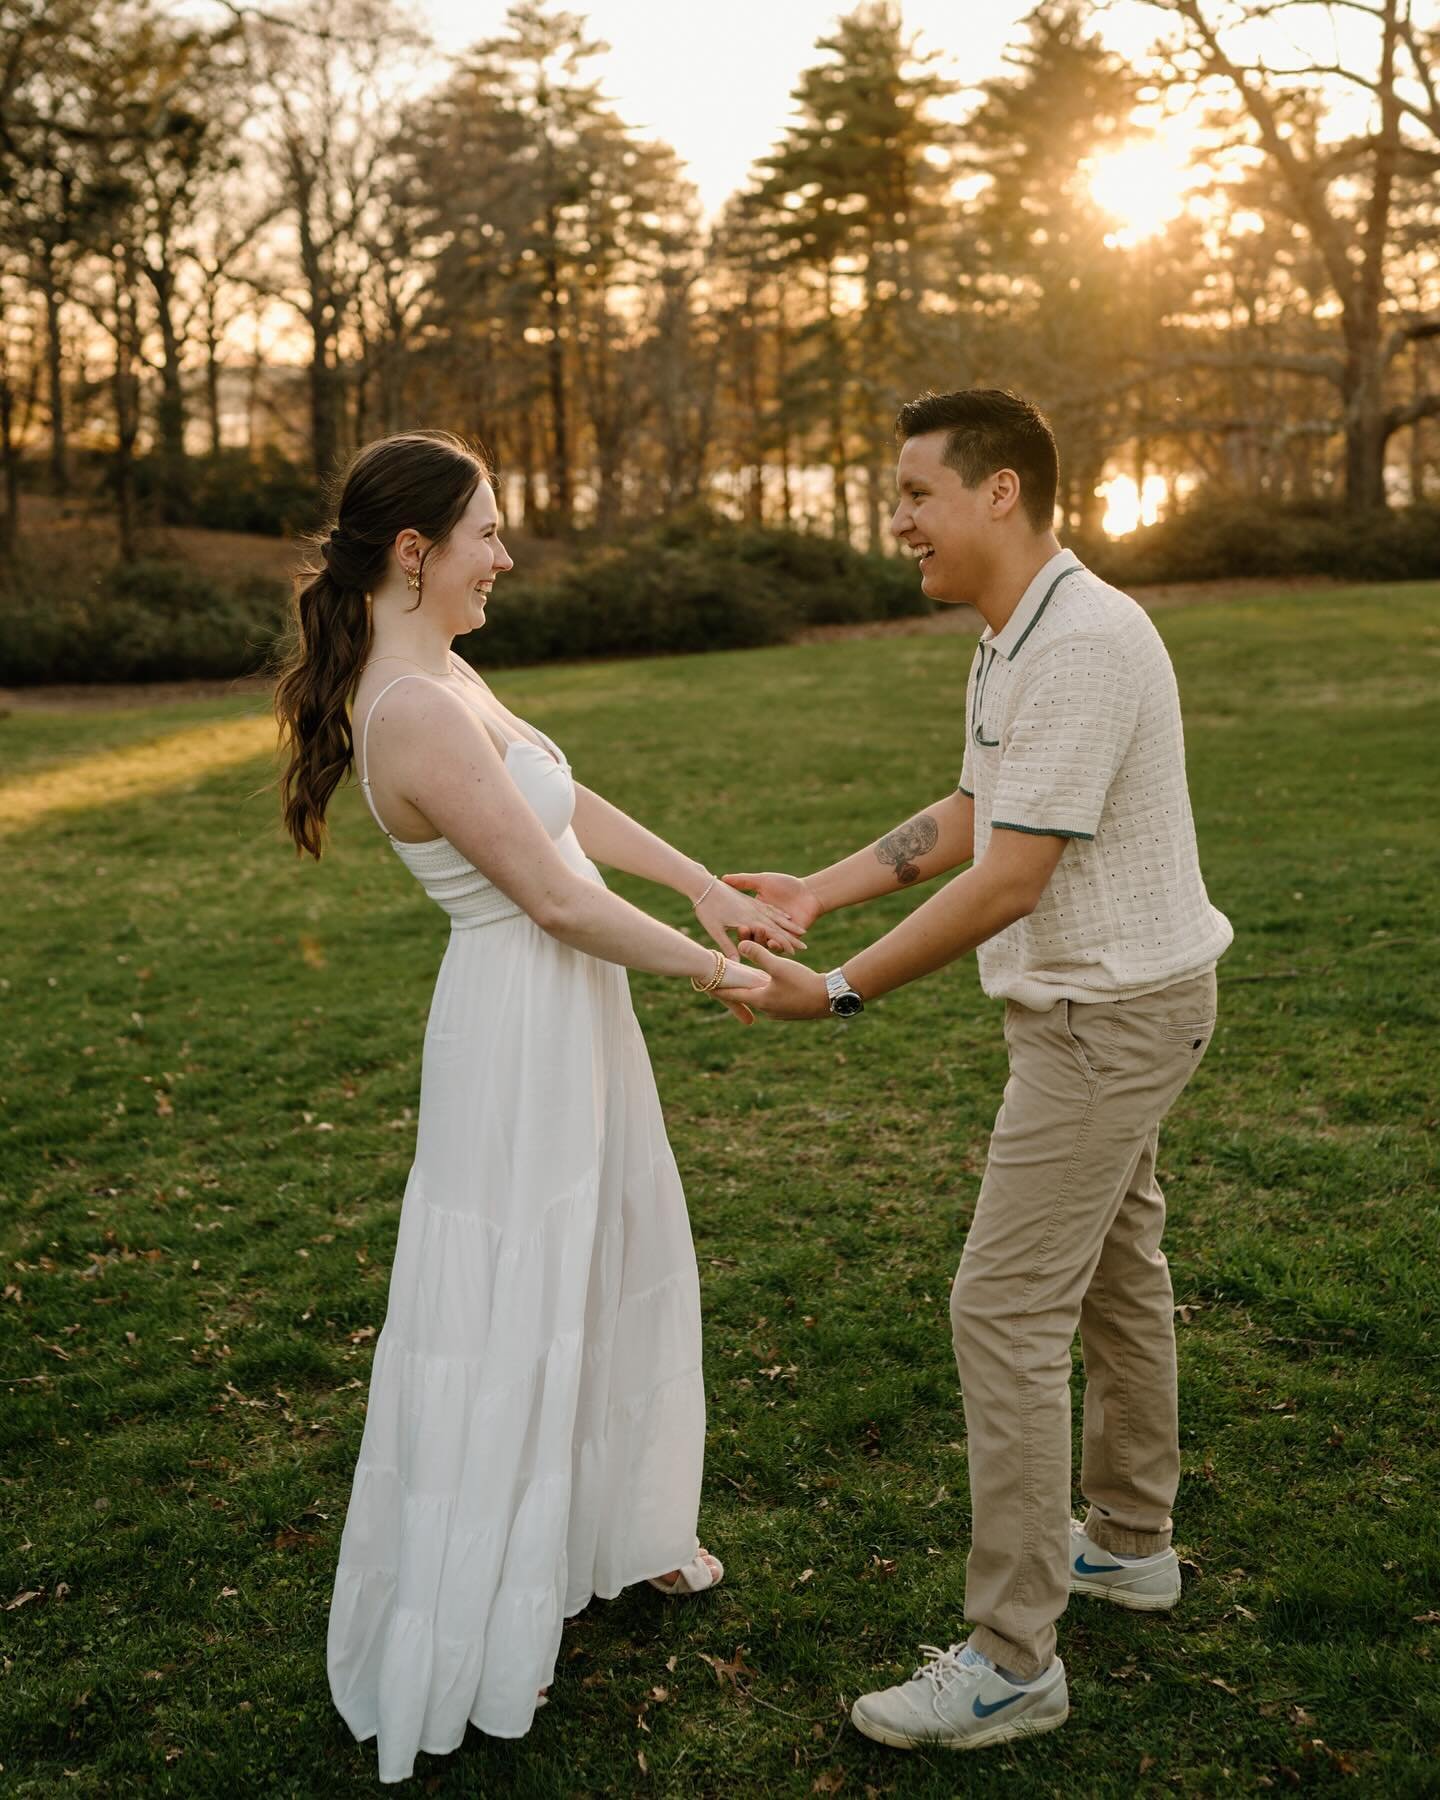 that golden hour kind of love 💛 I absolutely love how playful and happy these two are together &mdash; it&rsquo;s the sweetest thing to be marrying your best friend and you can just feel that love in these photos. Can&rsquo;t wait to celebrate I+M i